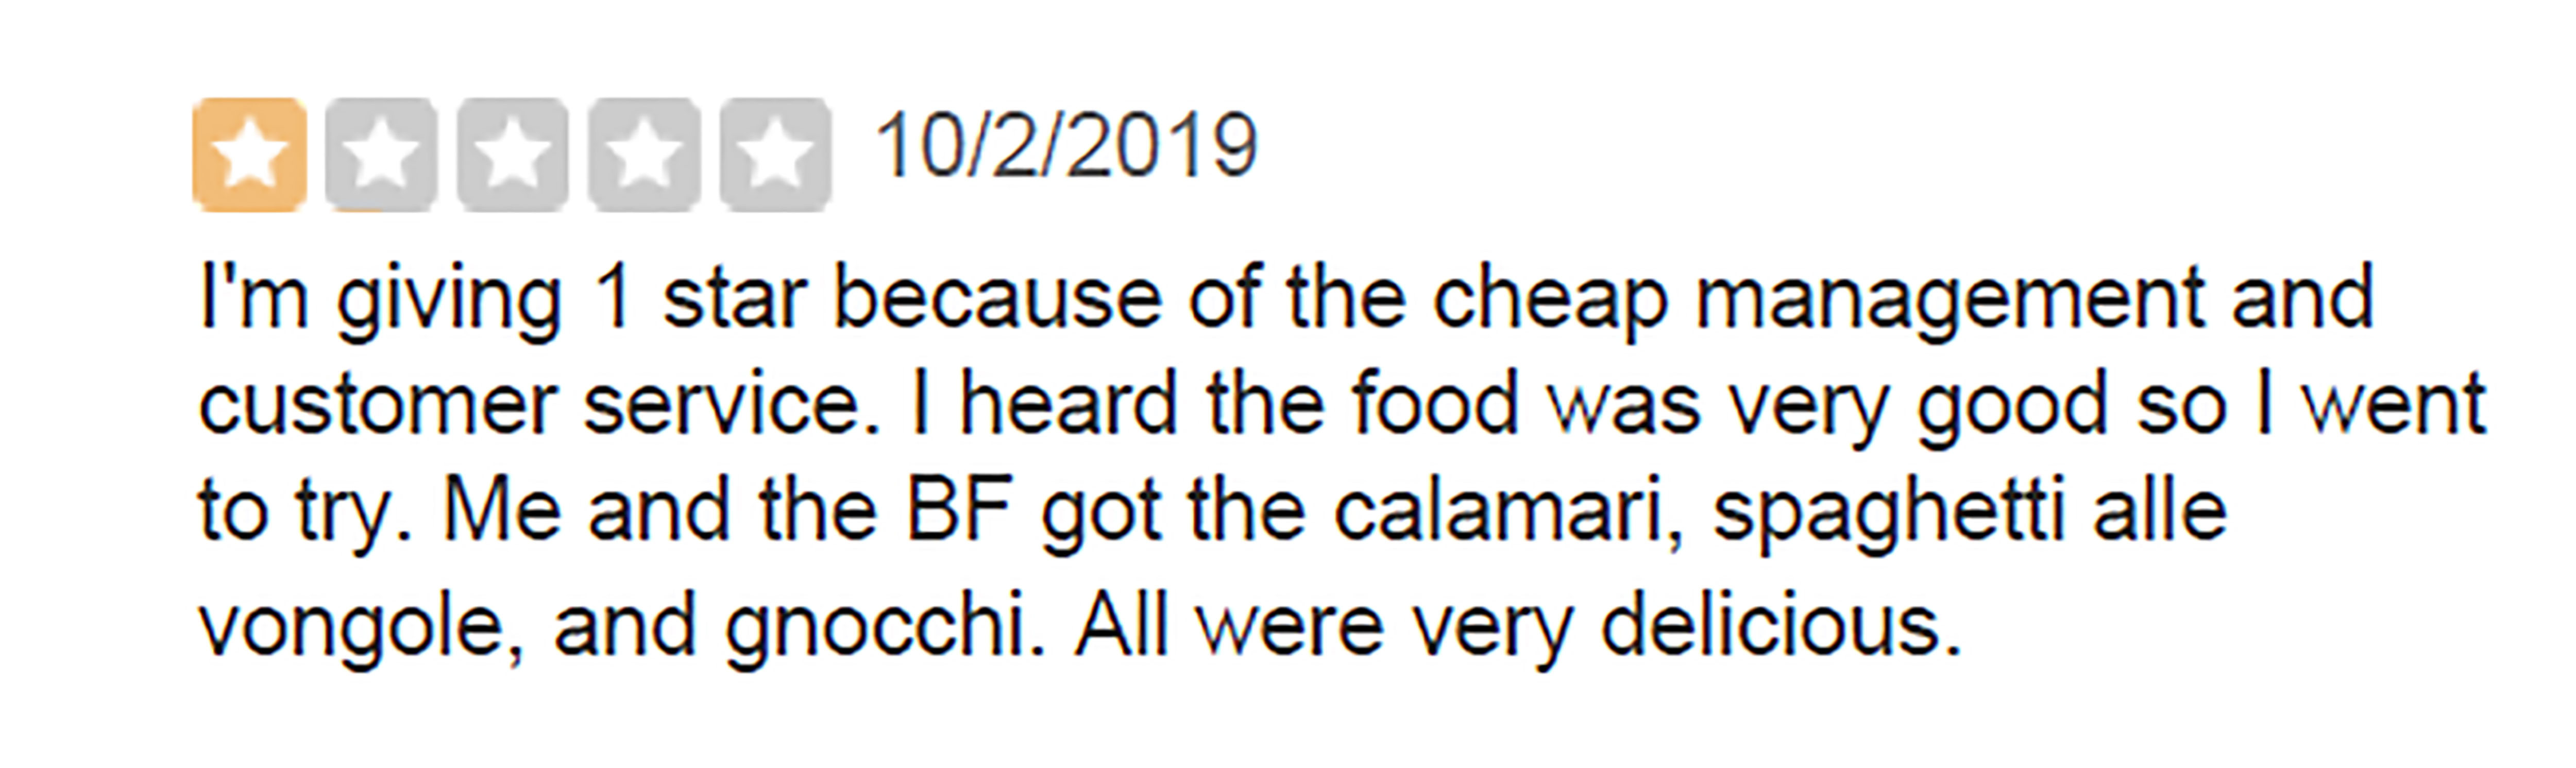 shaykh ubayd al jaabiree - 1022019 I'm giving 1 star because of the cheap management and customer service. I heard the food was very good so I went to try. Me and the Bf got the calamari, spaghetti alle vongole, and gnocchi. All were very delicious.